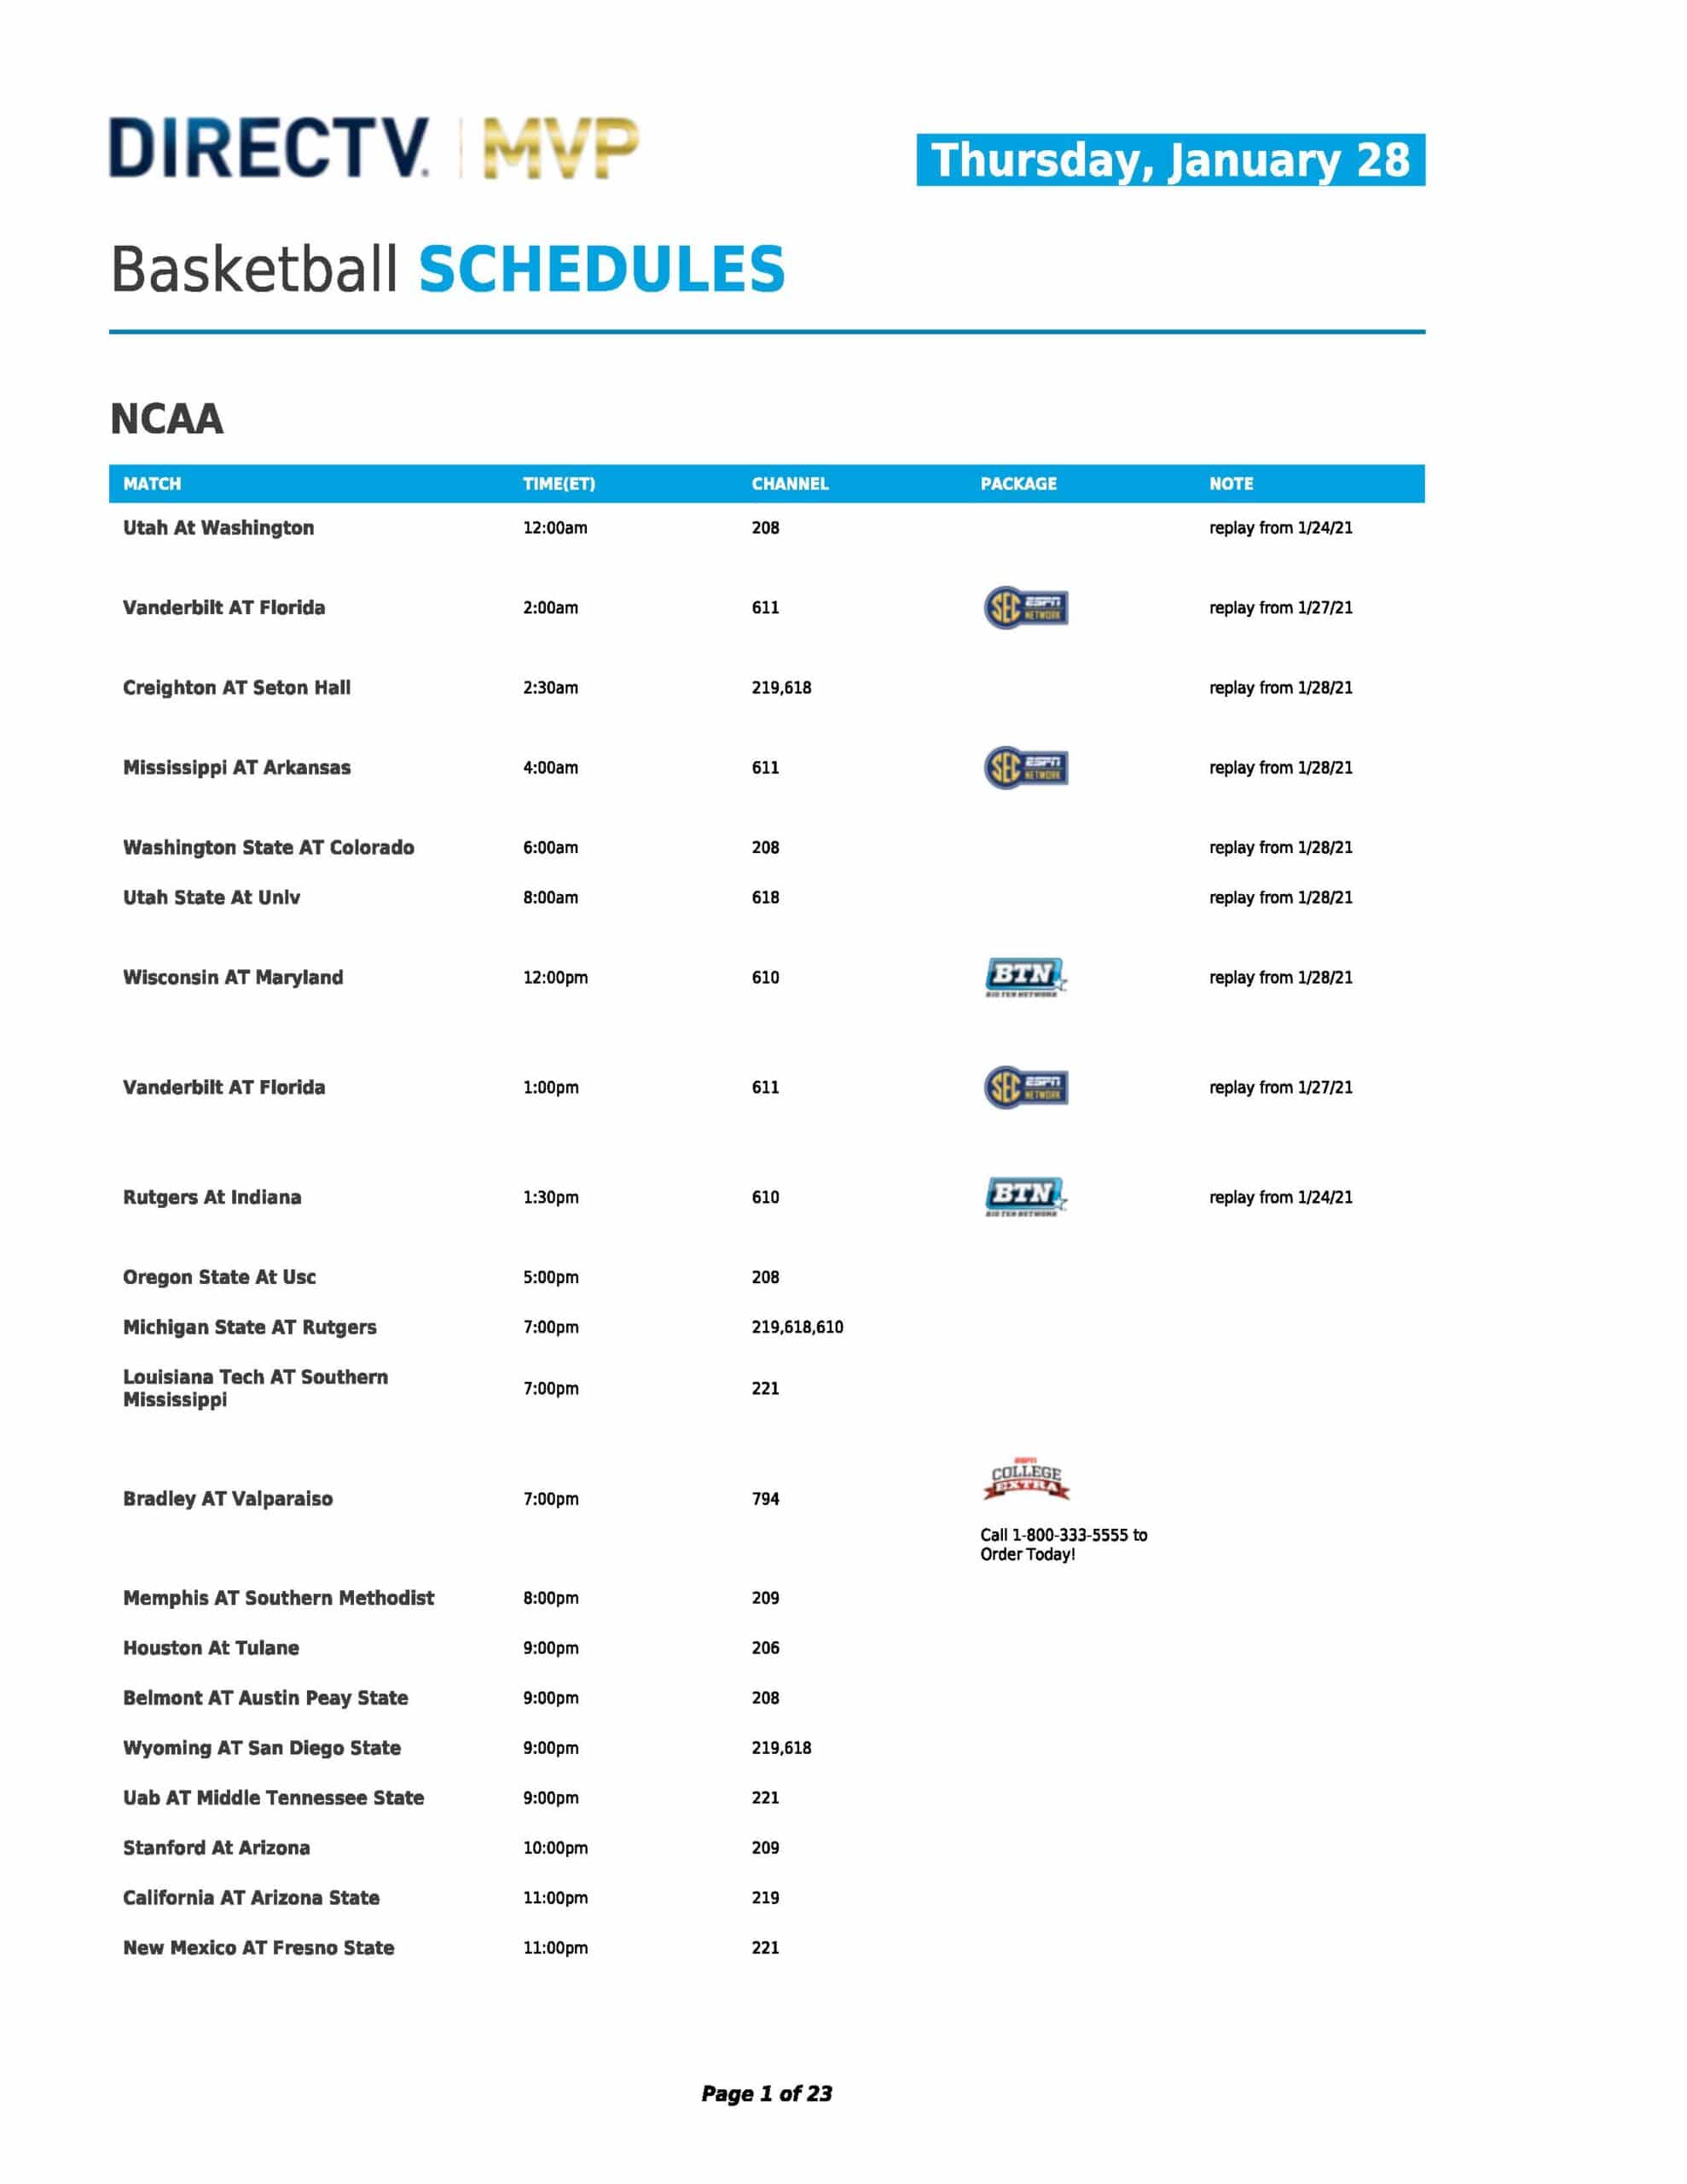 DIRECTV MVP MArketing Premium Sports Schedule Its All About Satellites - DIRECTV For Business Authorized Dealer